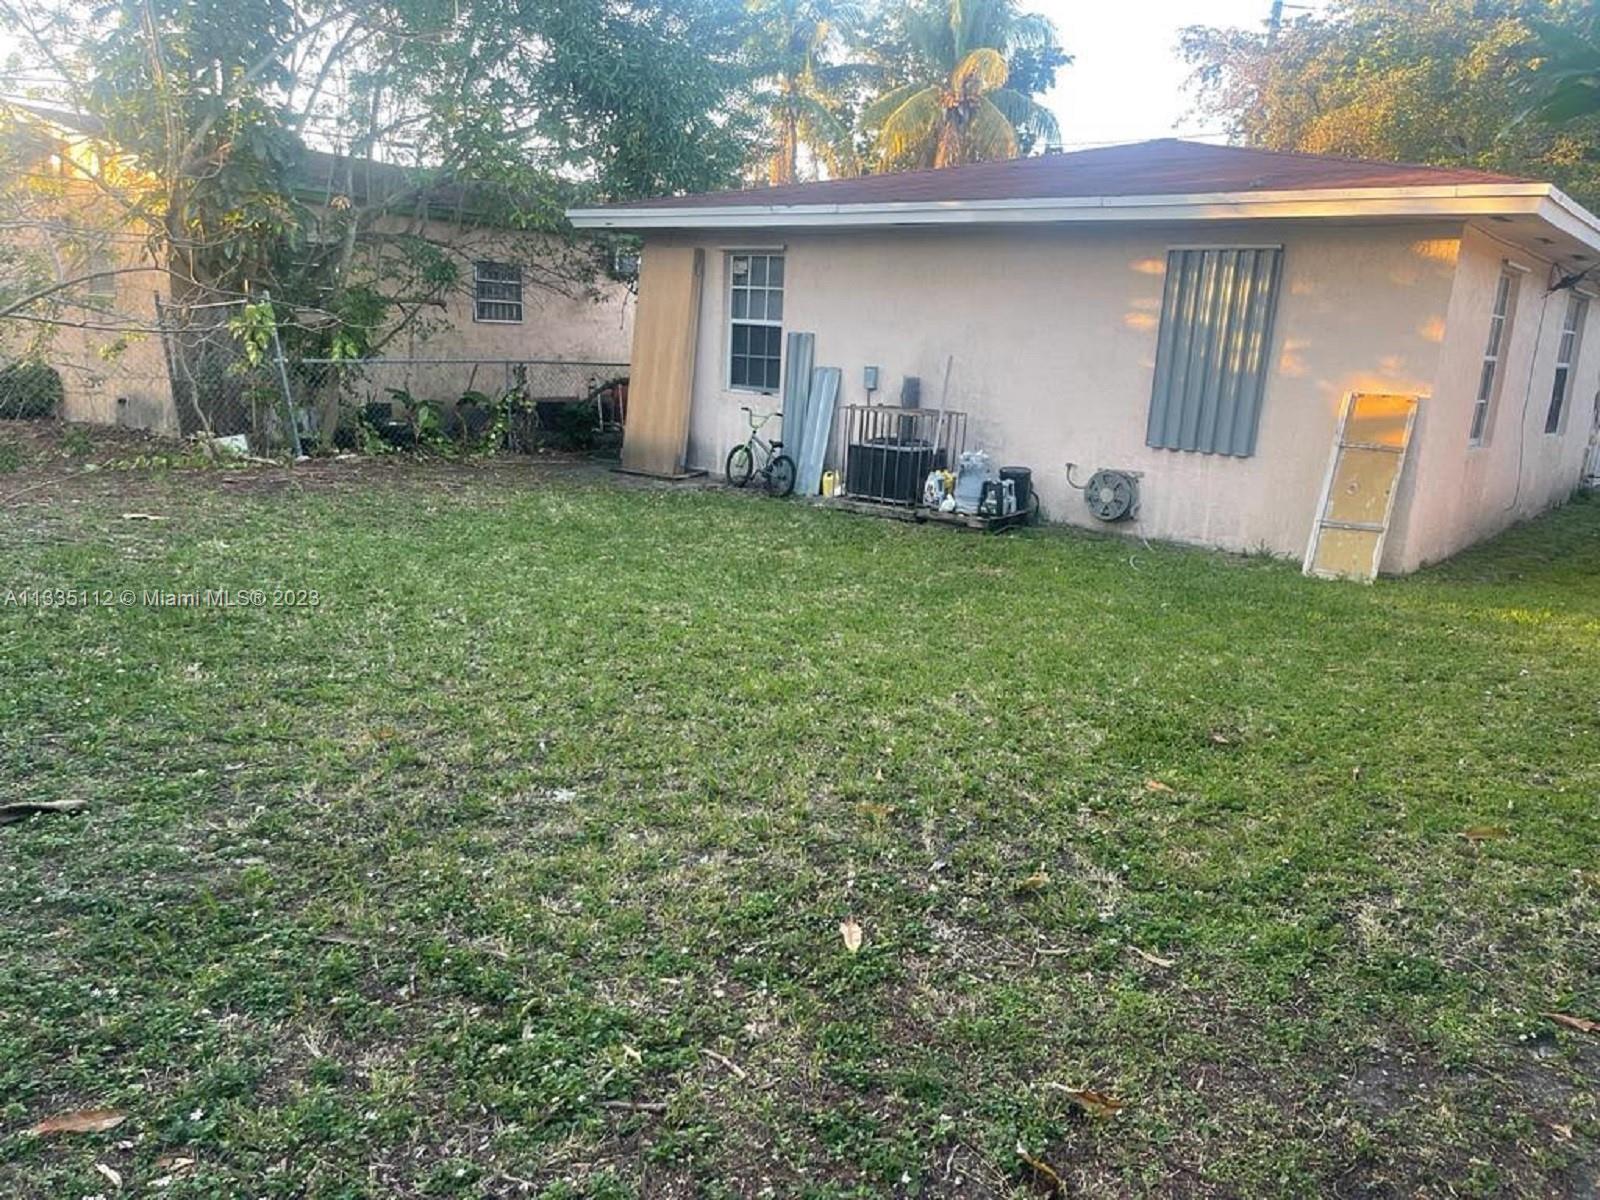 Photo 14 of 2280 51st Ter in Miami - MLS A11335112